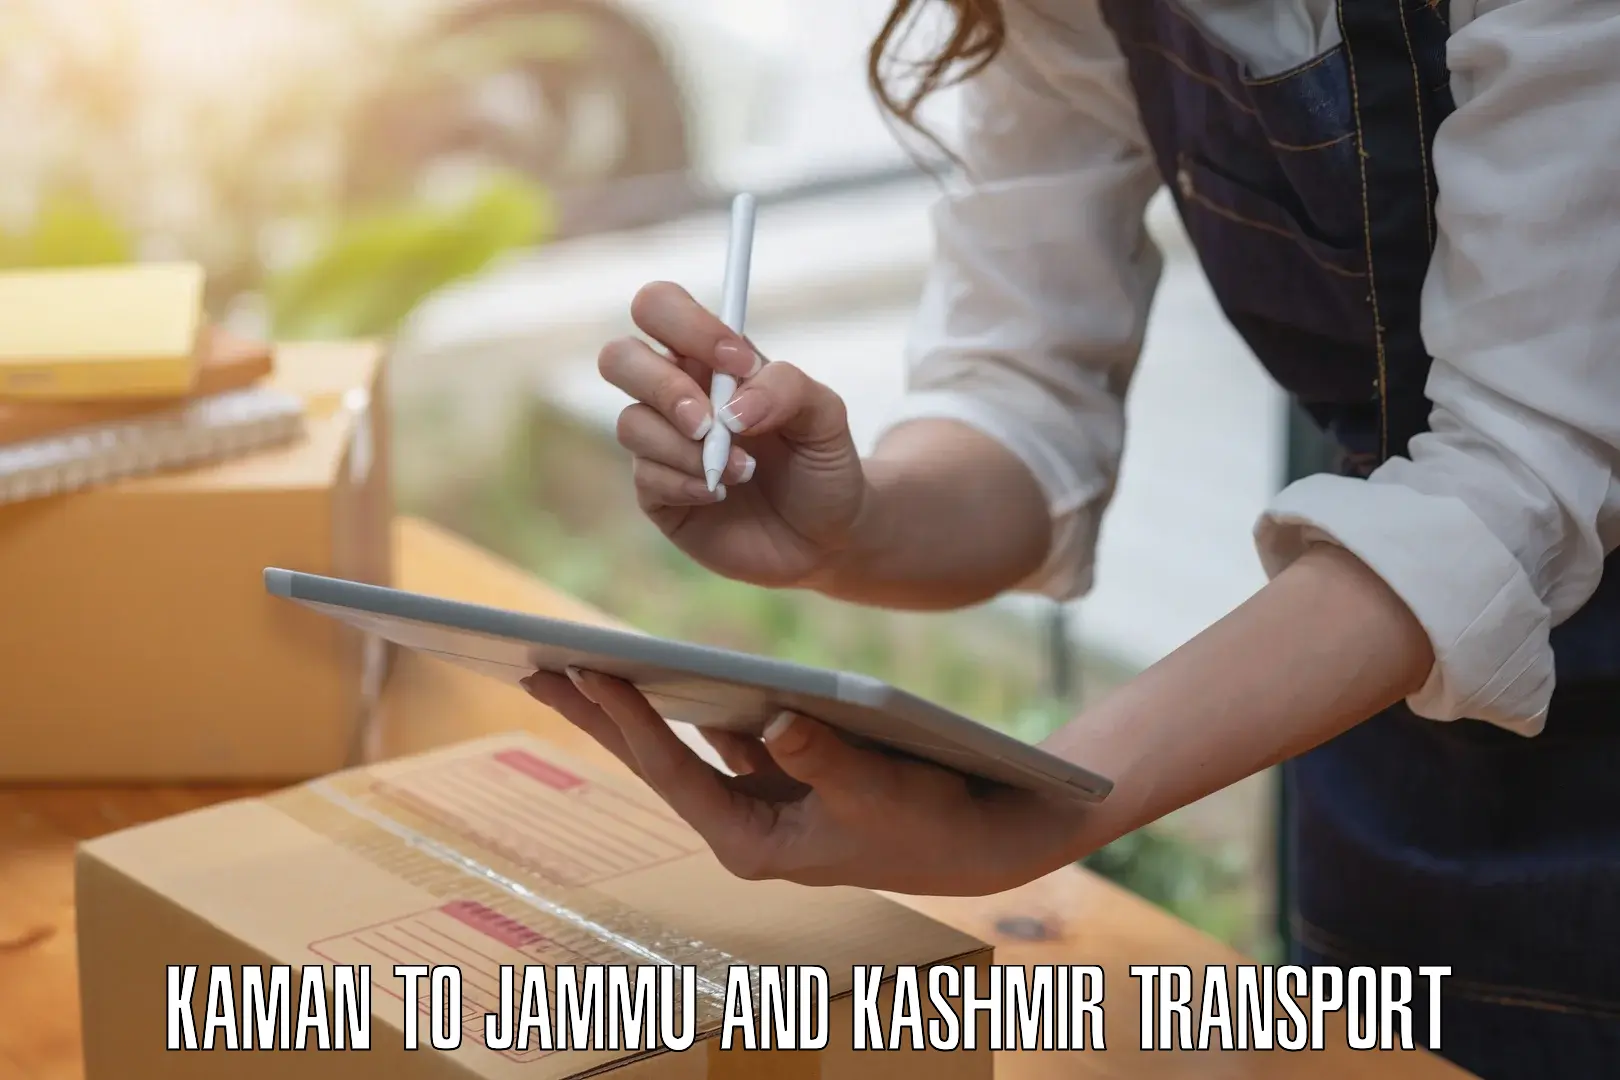 Air cargo transport services in Kaman to Jammu and Kashmir